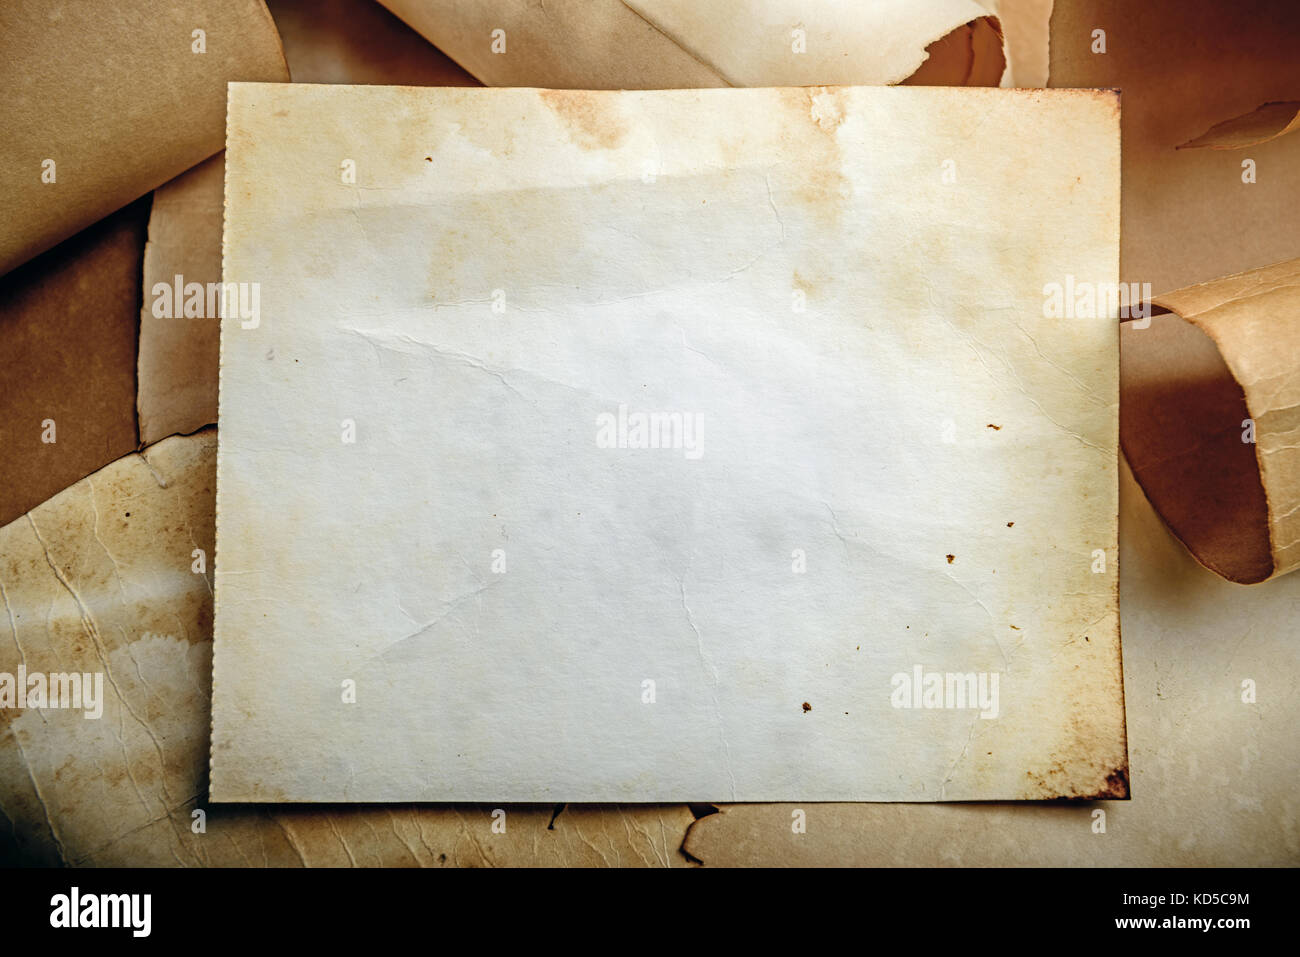 old  grunge paper background on torn  medieval scrolls document Stock Photo